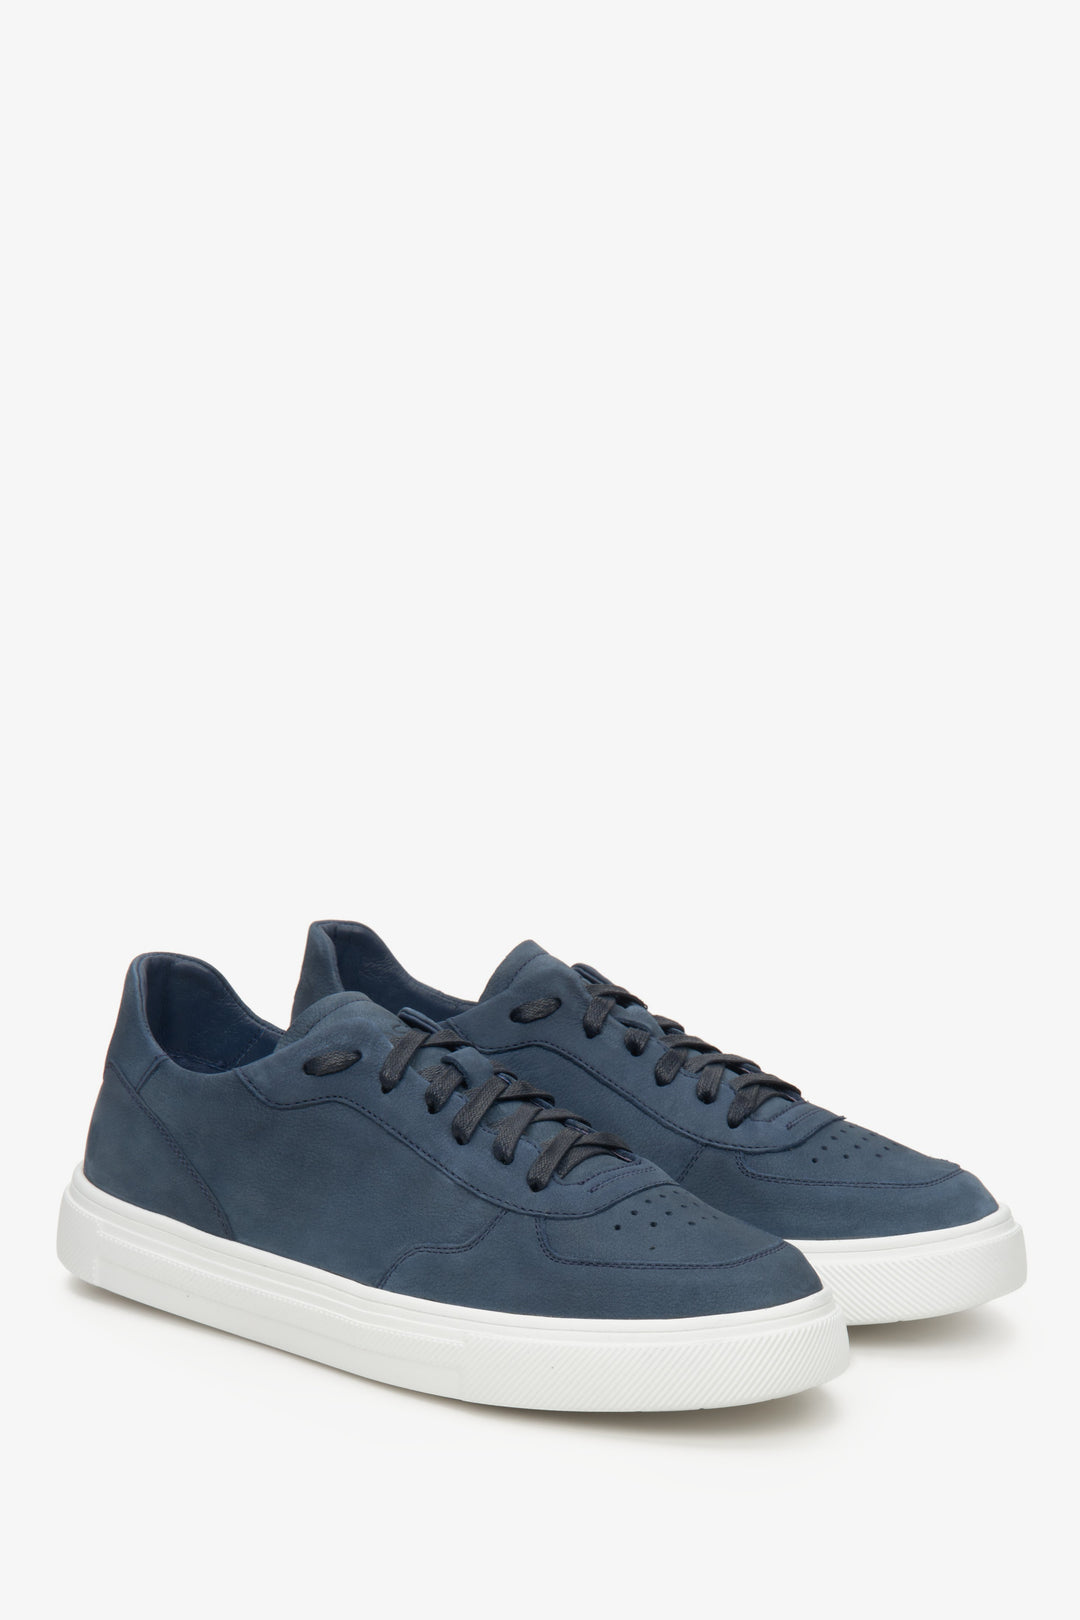 Men's blue nubuck sneakers with lacing for spring - presentation of the toe cap and side seam of the shoe.